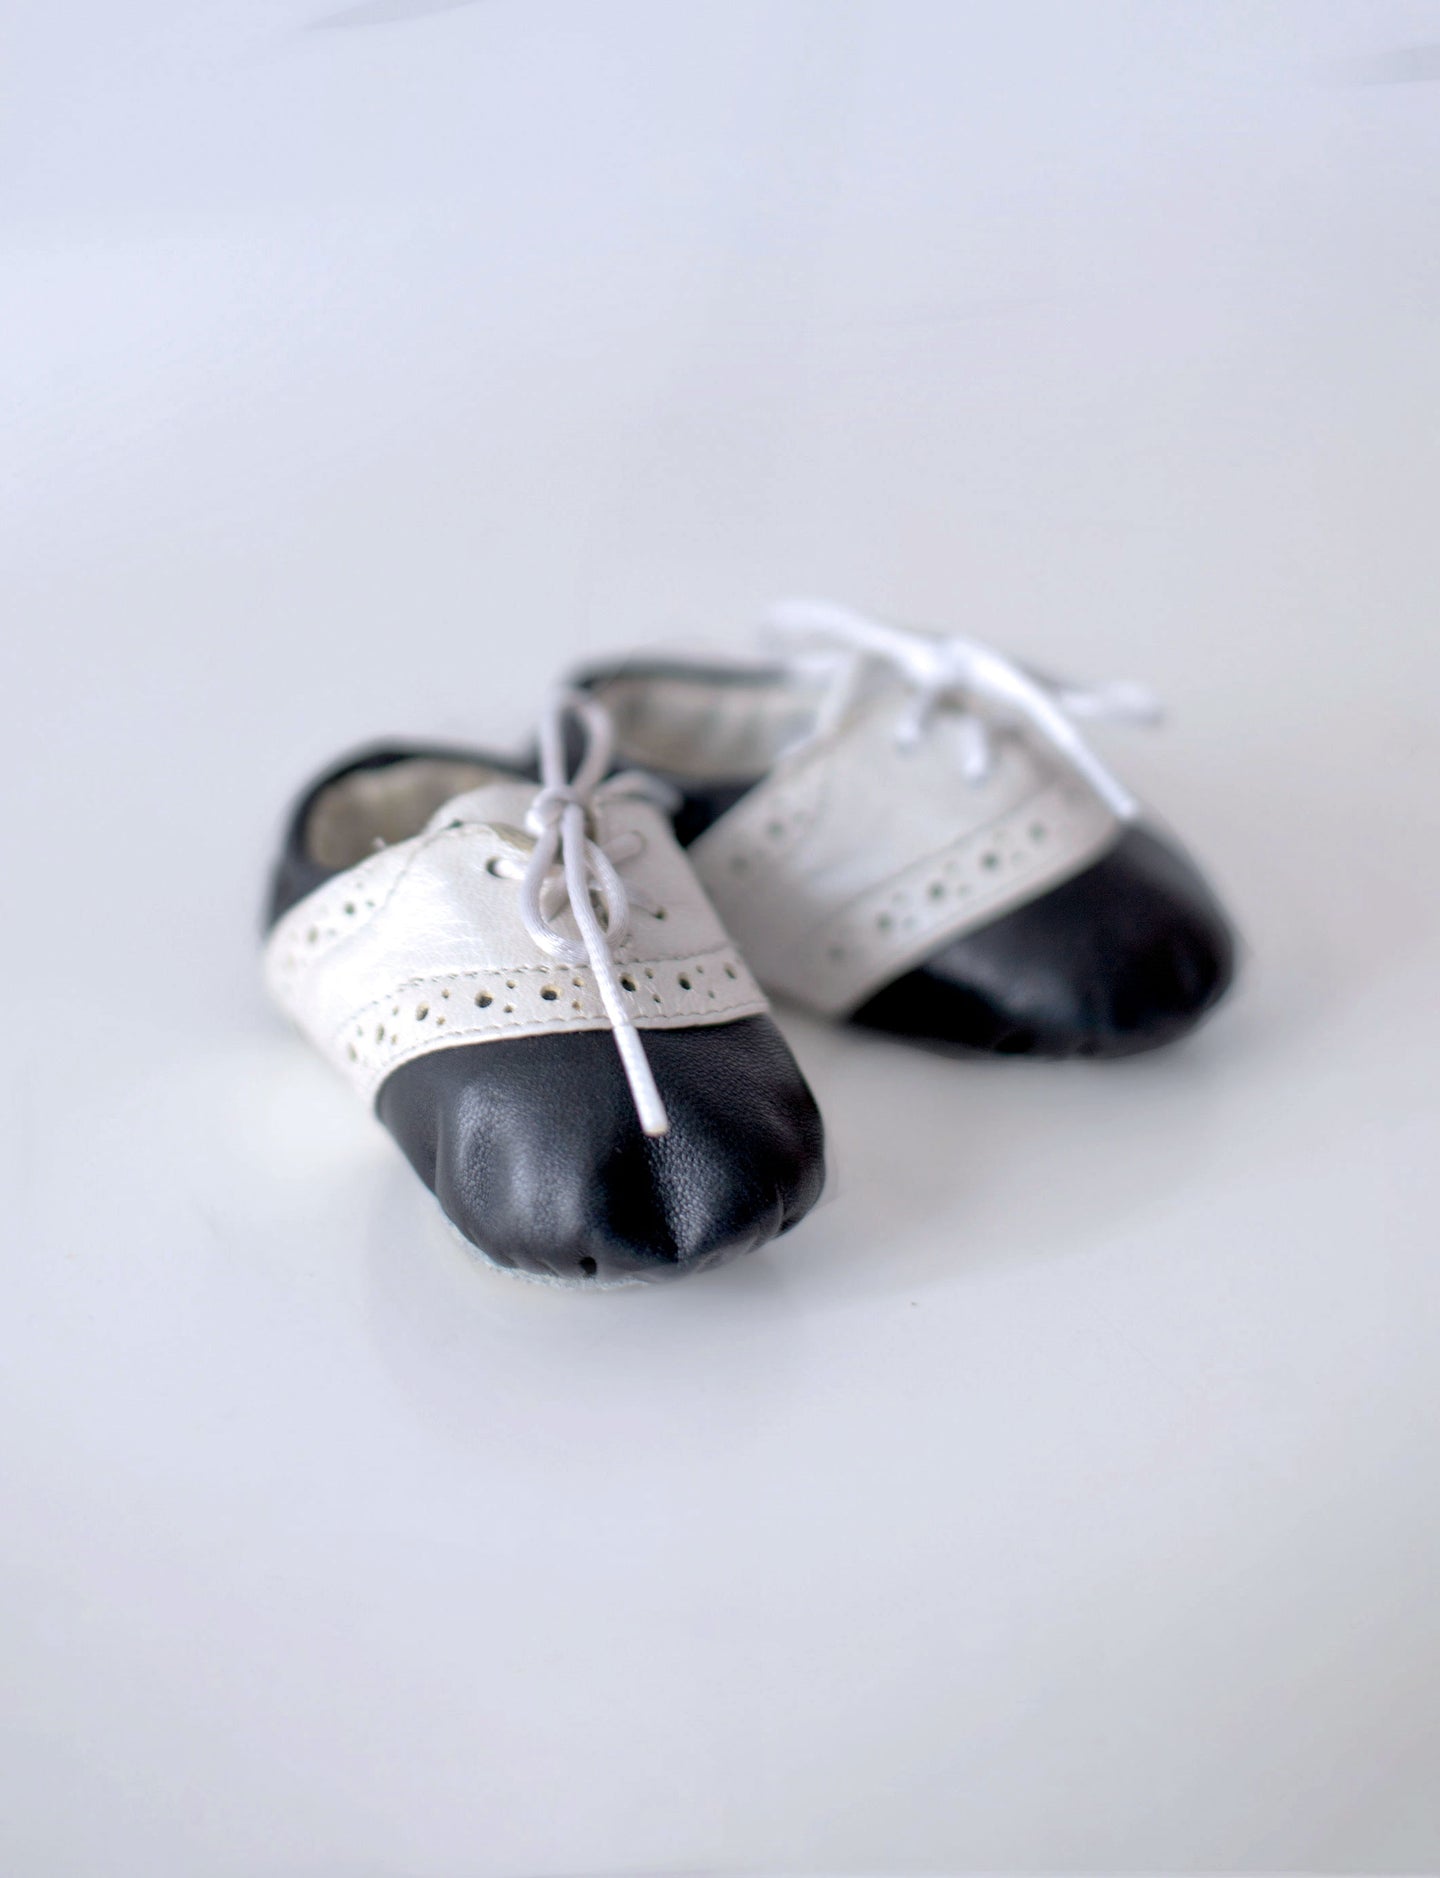 [US1] Baby Bloch Black & White Leather Shoes in box